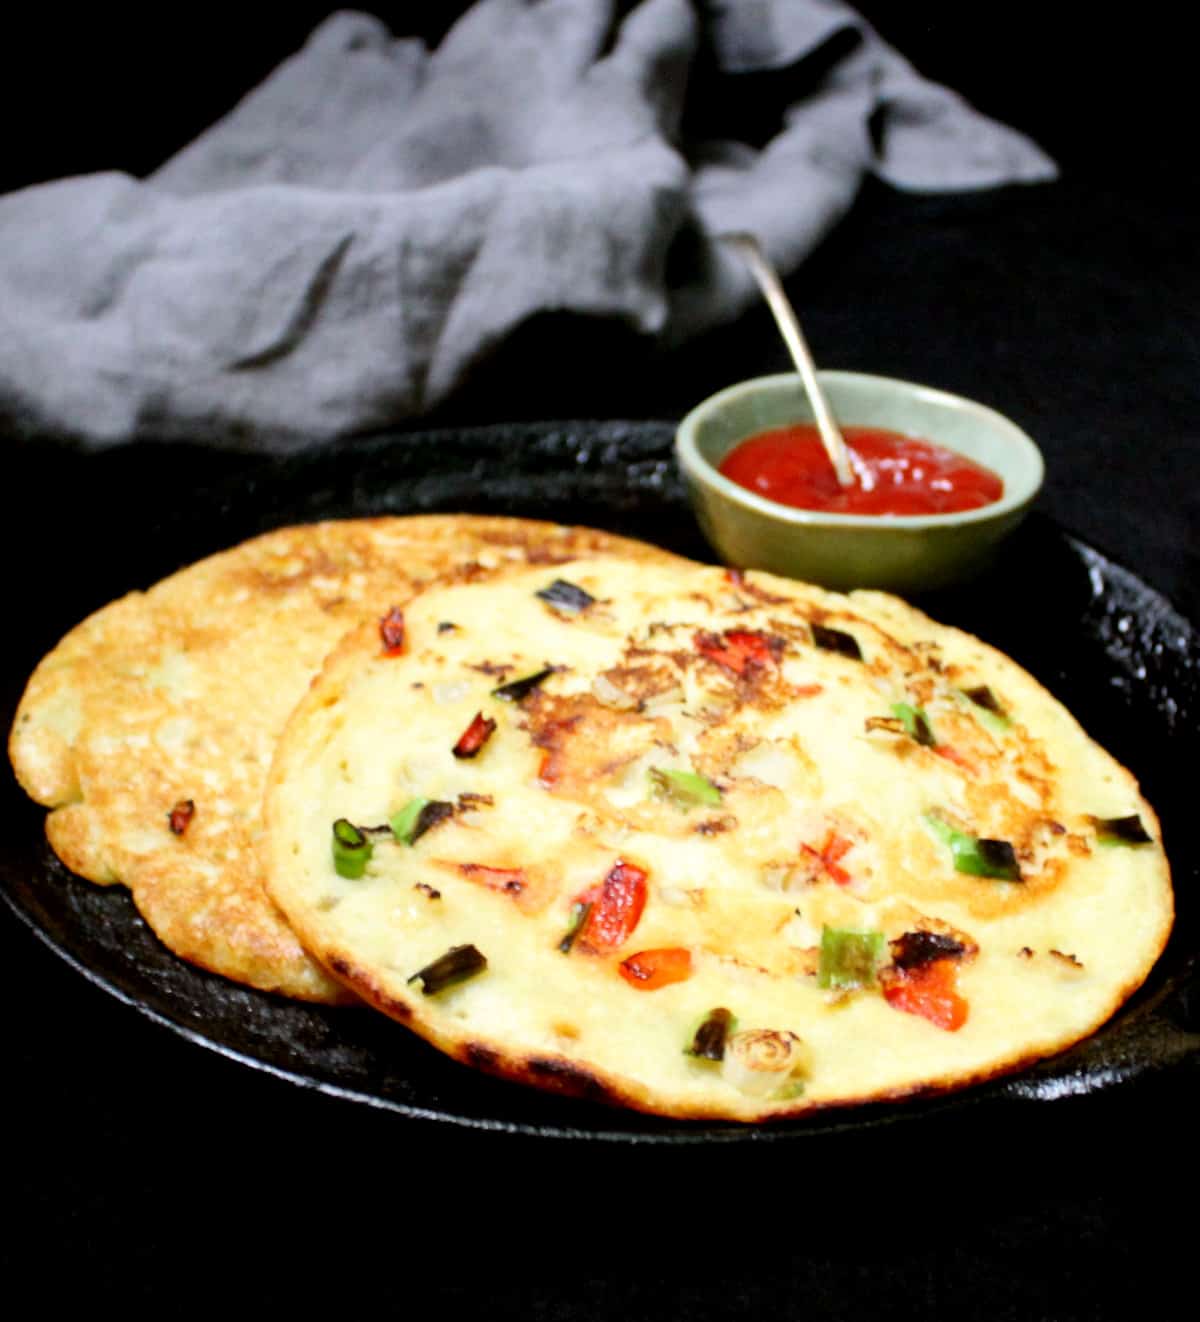 Front shot of two moonglets or mung bean omelets studded with veggies like bell peppers, onions and scallions on a cast iron griddle.